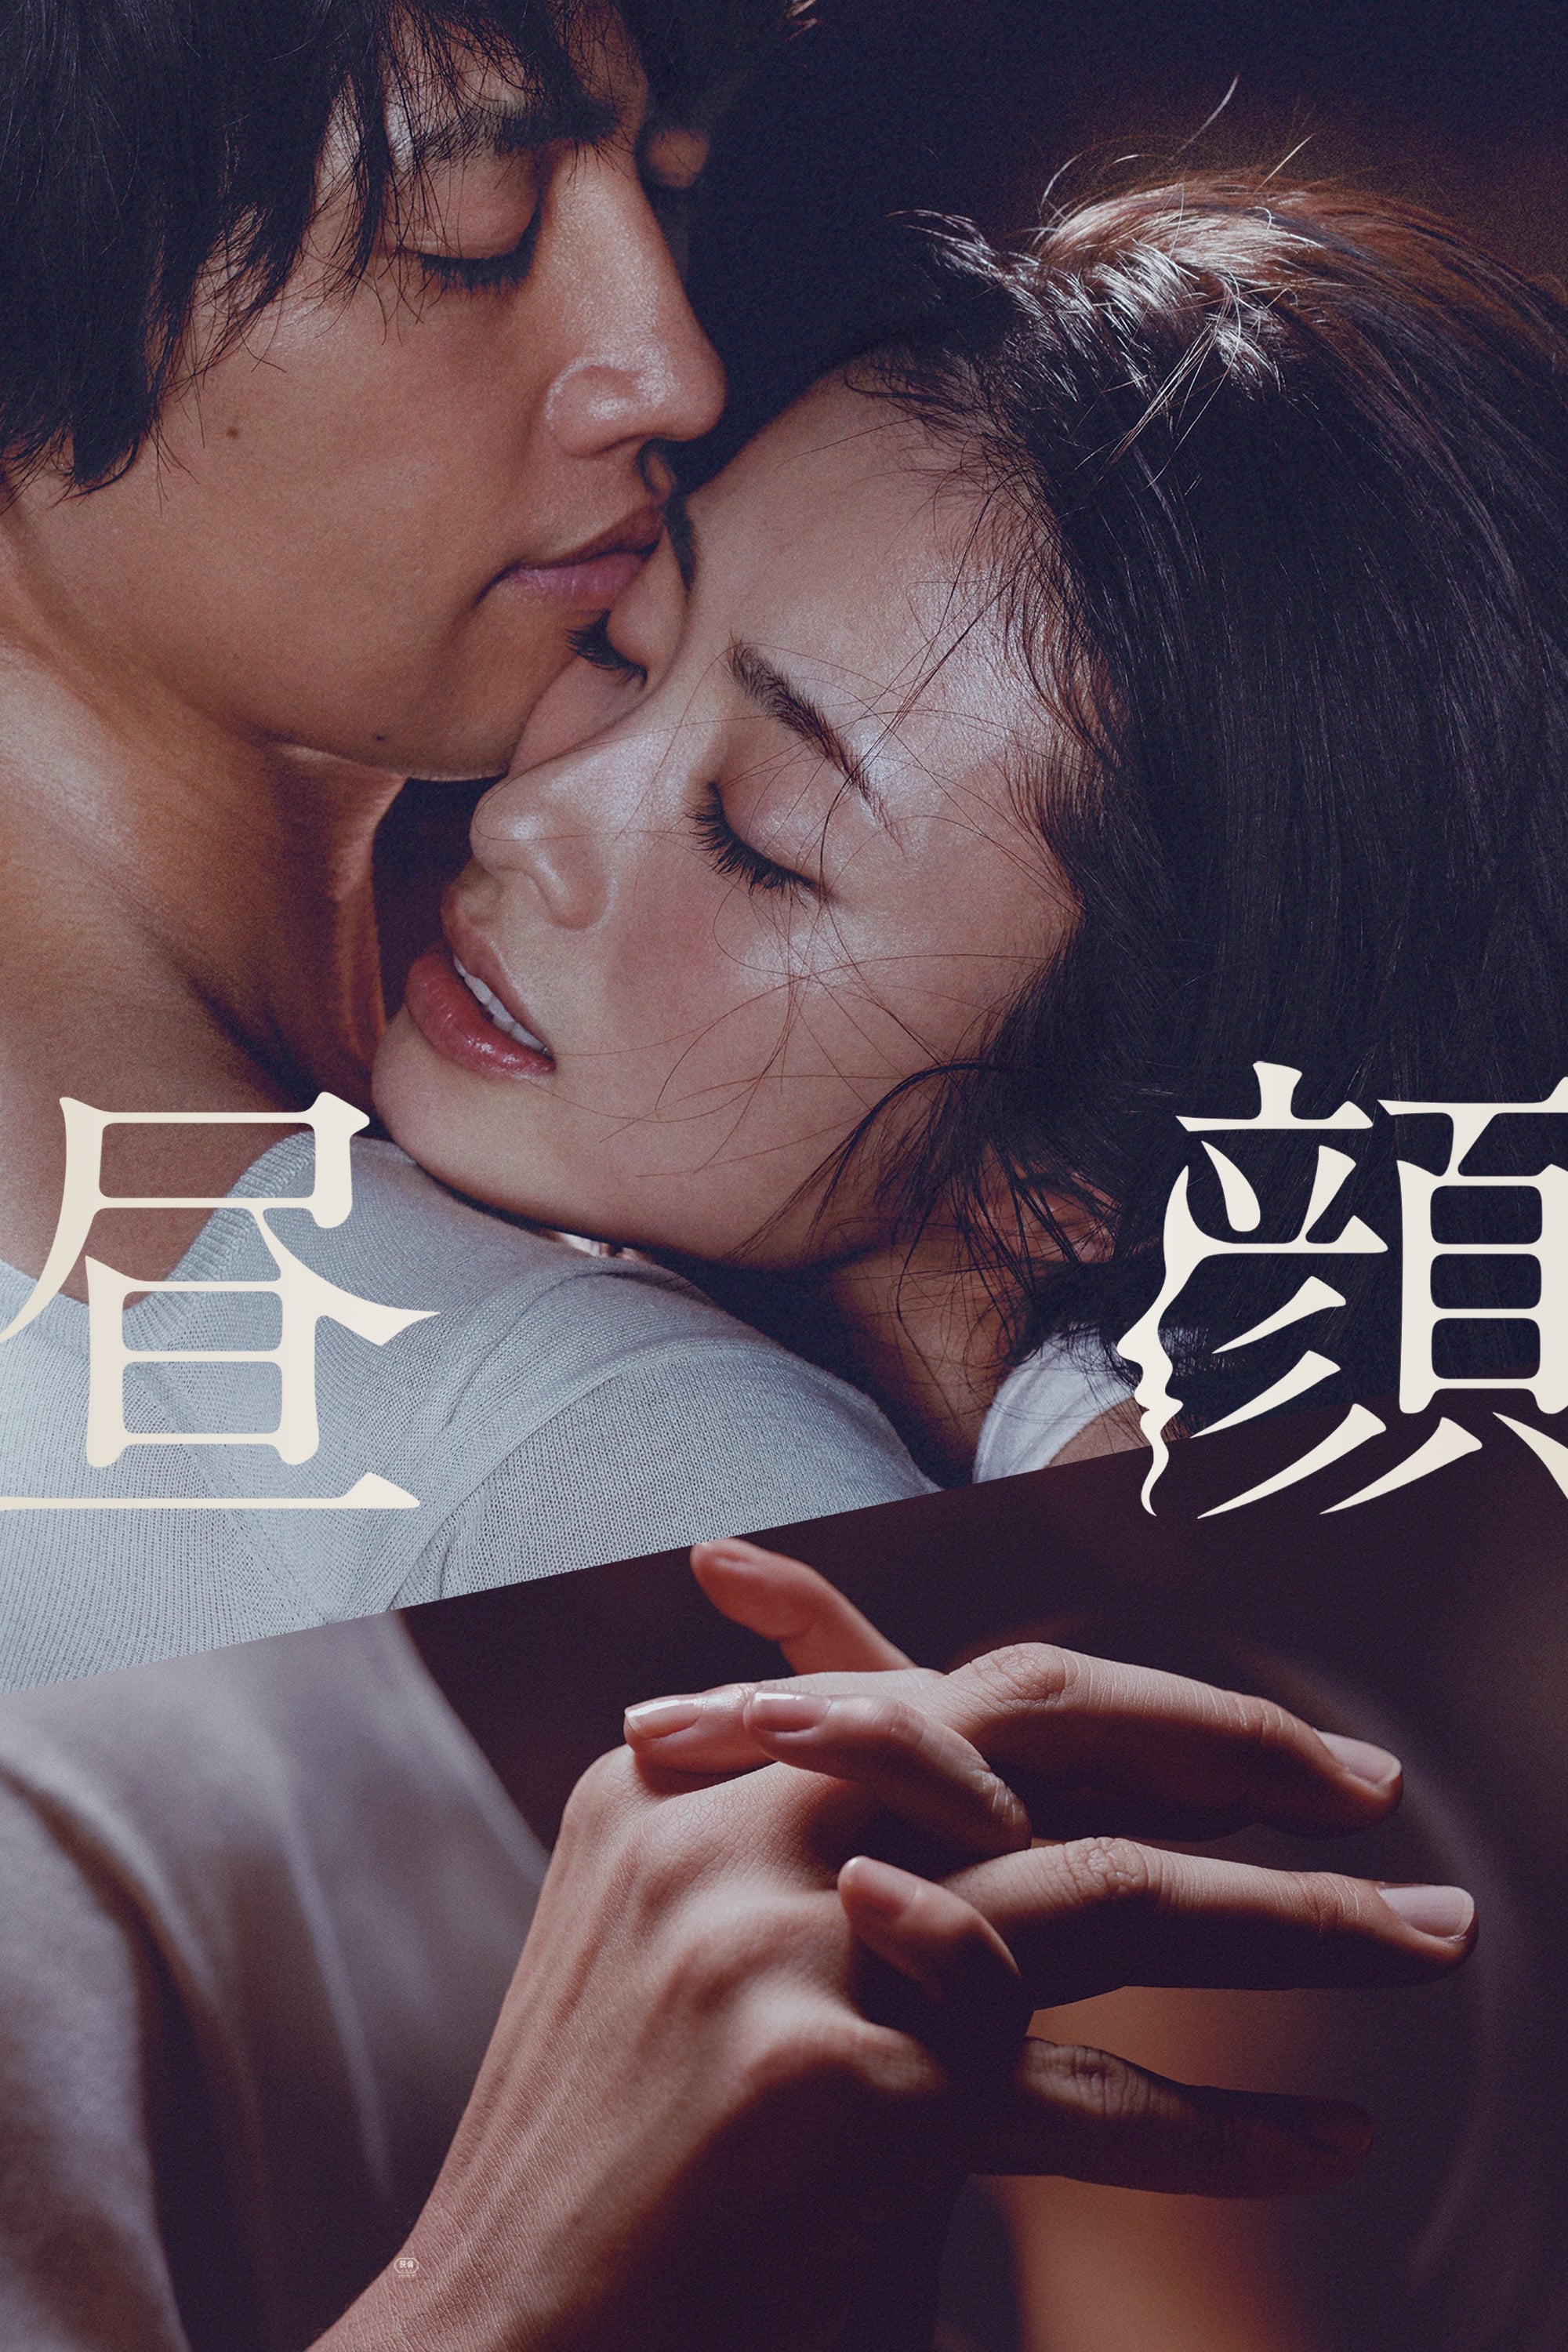 Hirugao : Love Affairs in the Afternoon